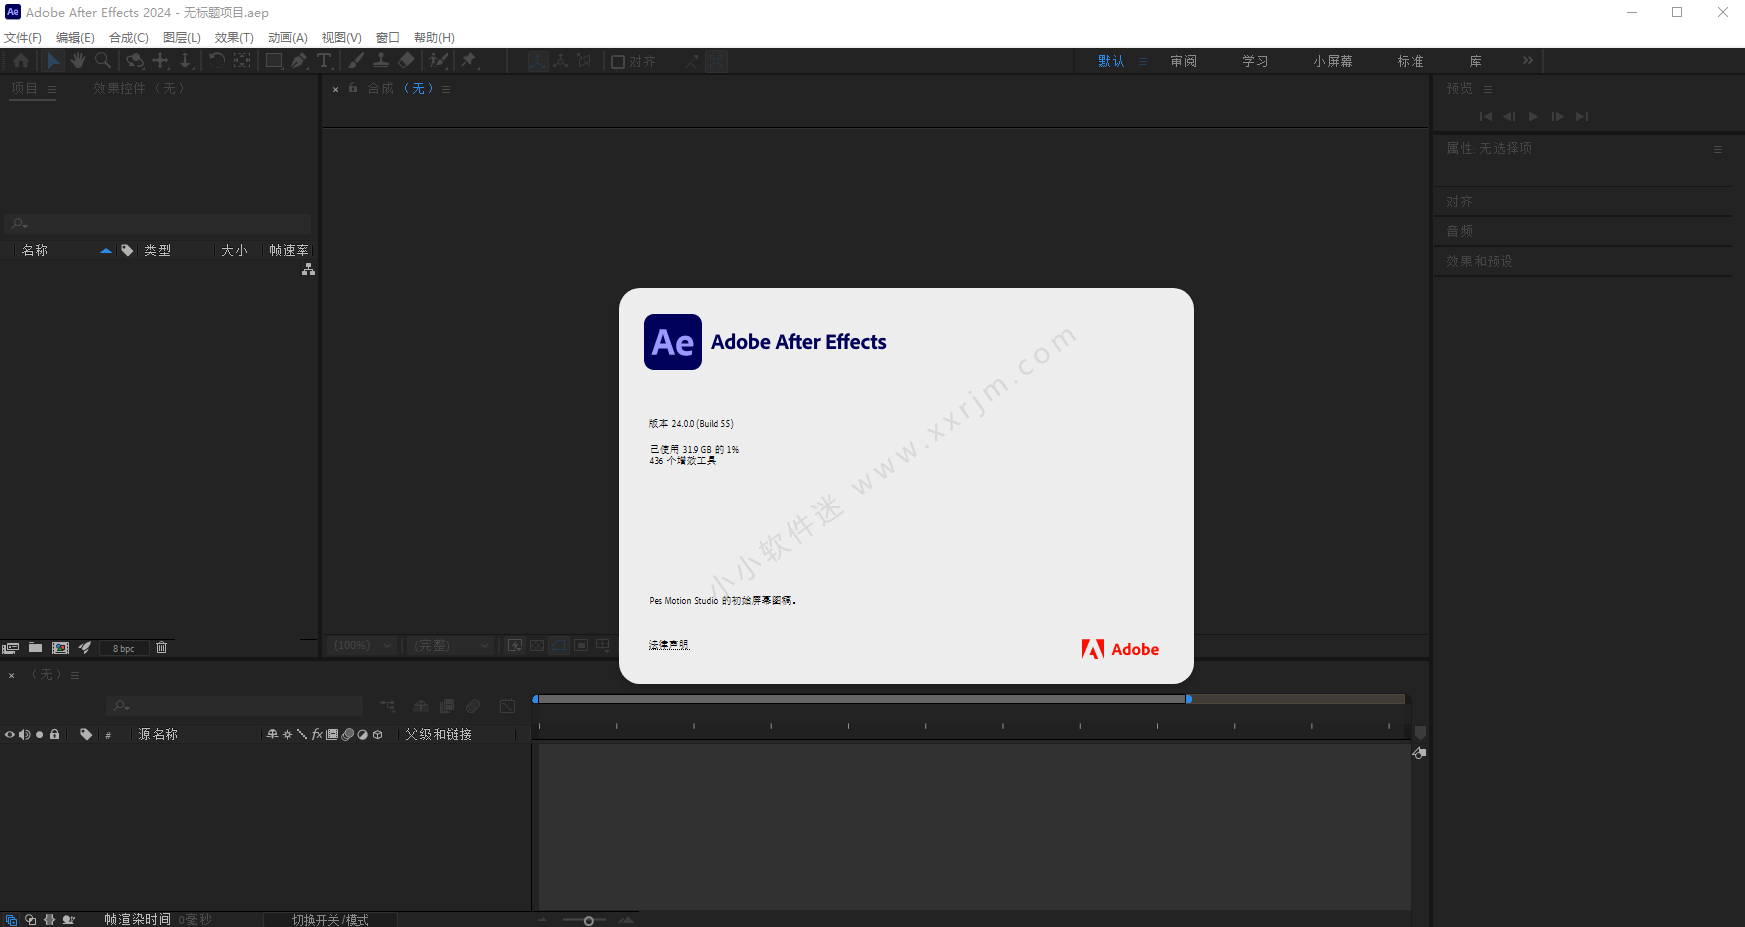 Adobe After Effects 2024 v24.0.0.55 instal the new version for android